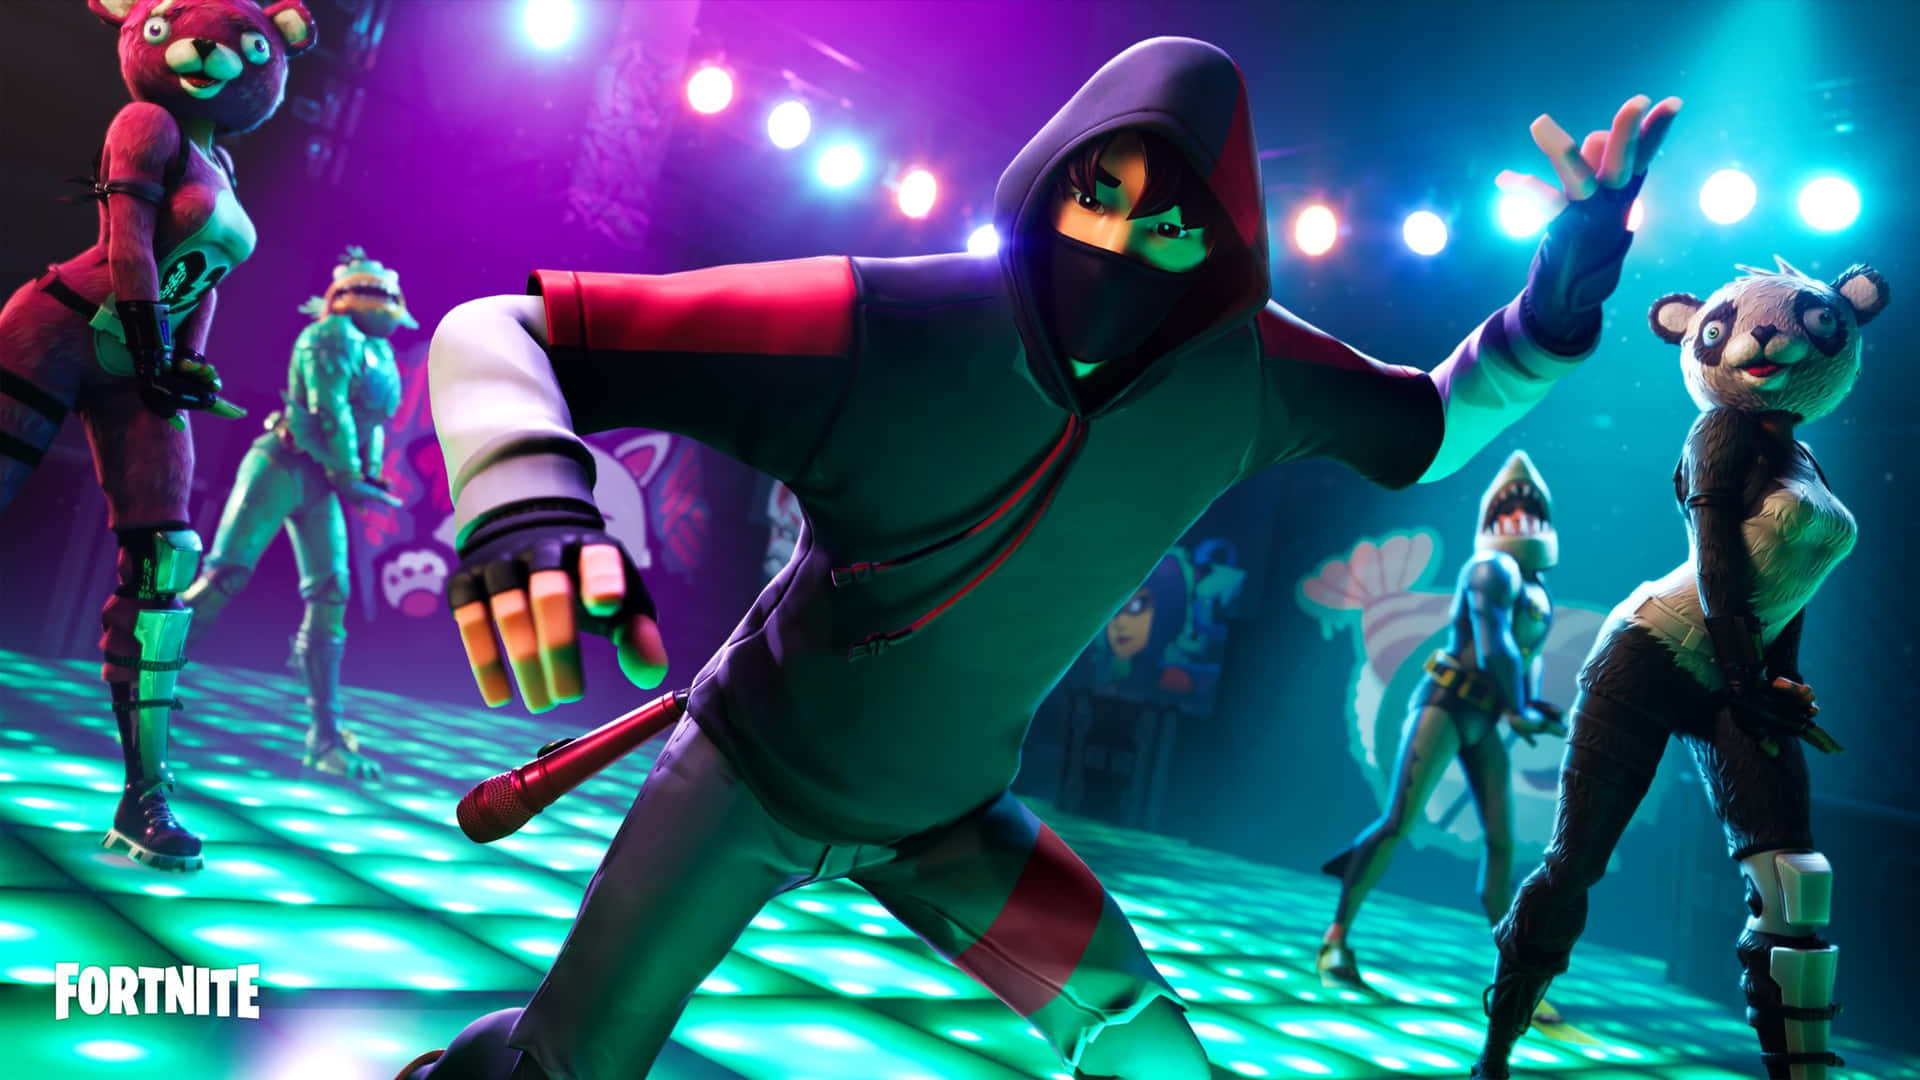 Unveiling the limited-edition Fortnite Ikonik Skin Wallpaper